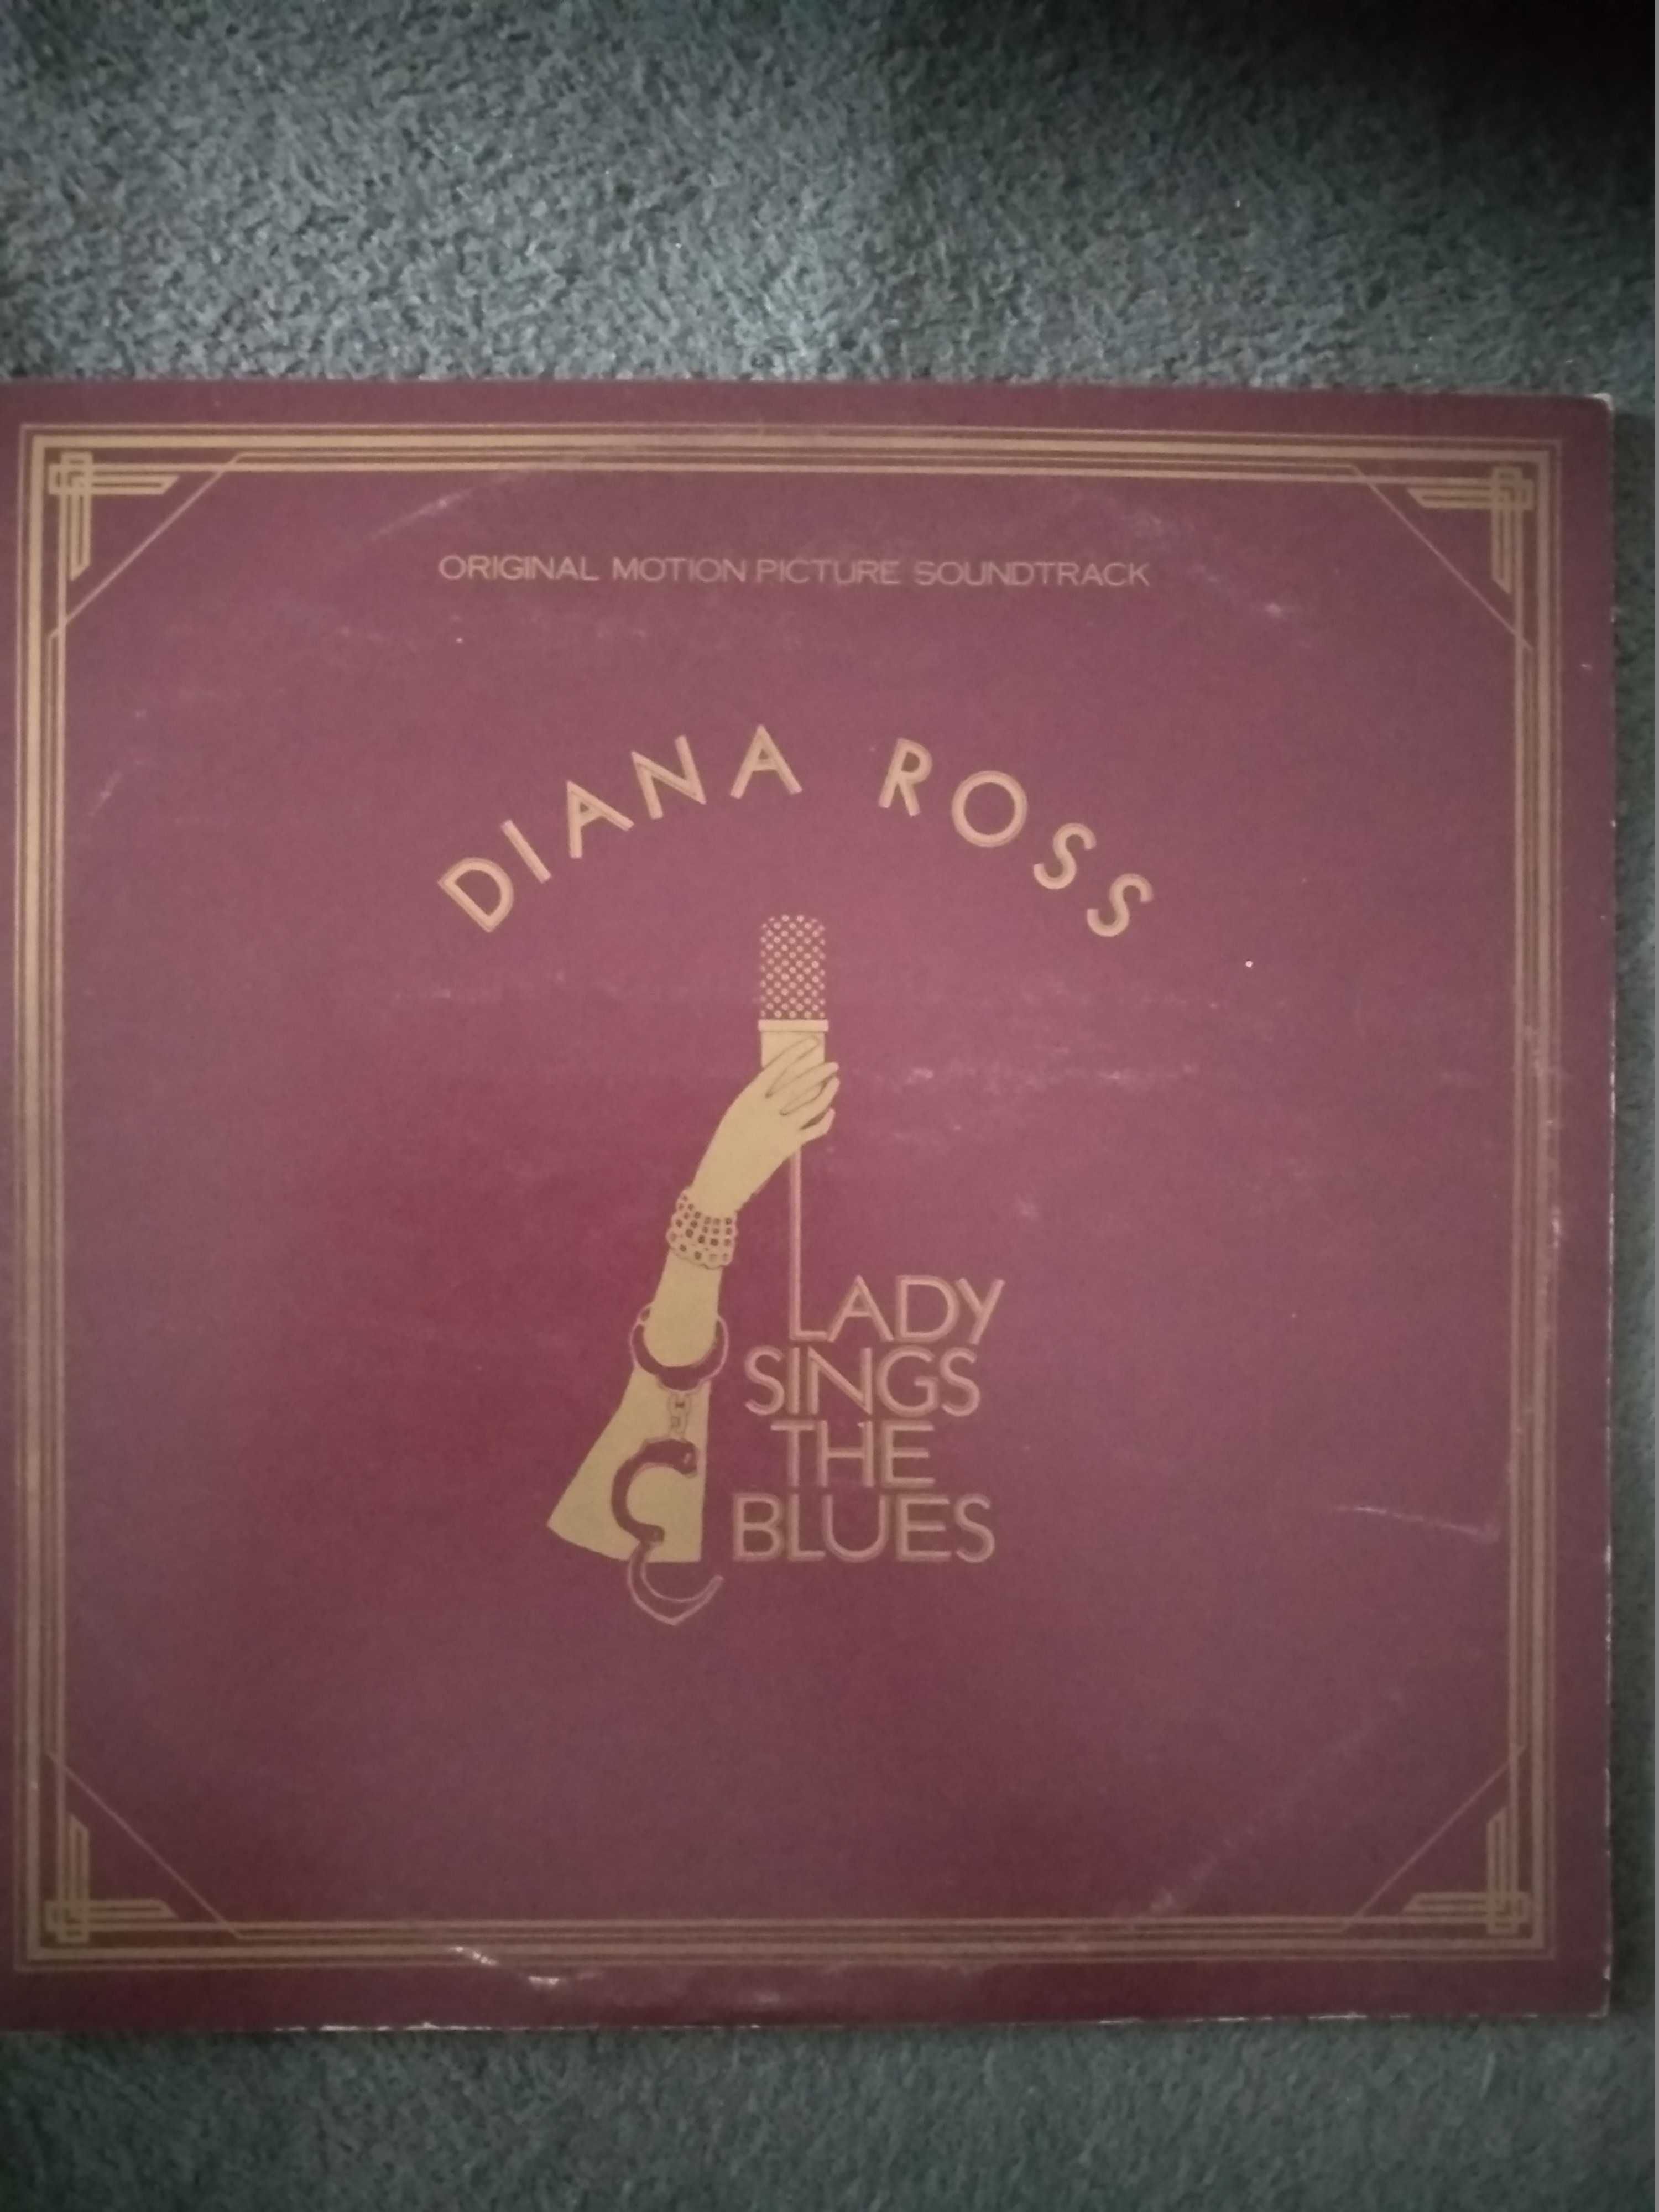 Diana Ross ‎– Lady Sings The Blues (Motion Picture Soundtrack)